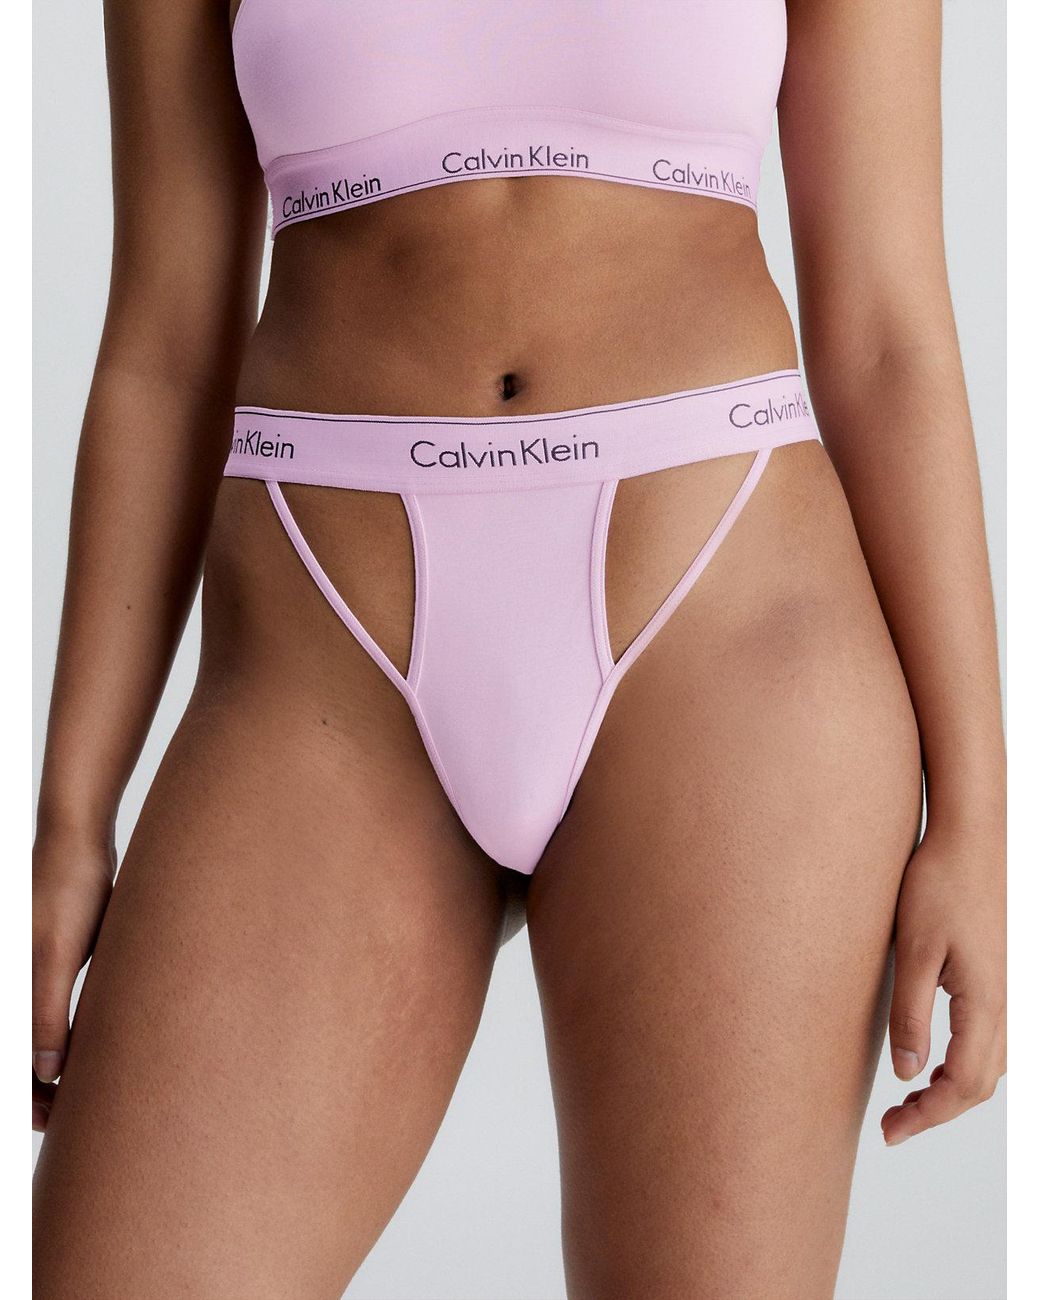 Calvin Klein String Thong - Ck Deconstructed in Pink